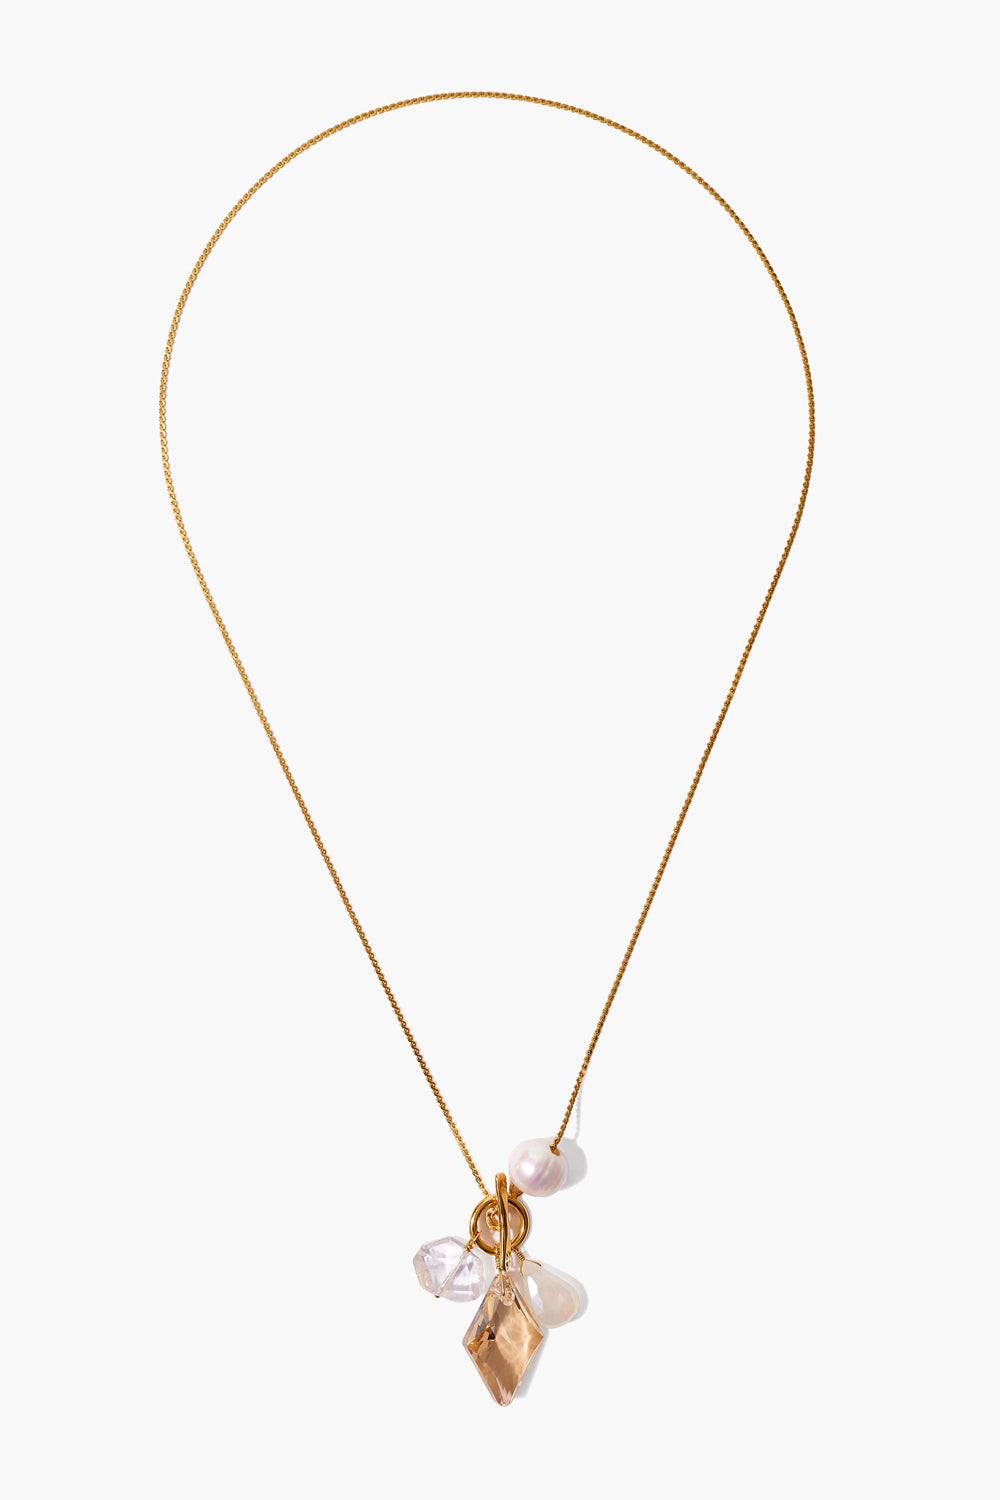 GOLDEN MIX CHALCHEDONY NECKLACE - Kingfisher Road - Online Boutique